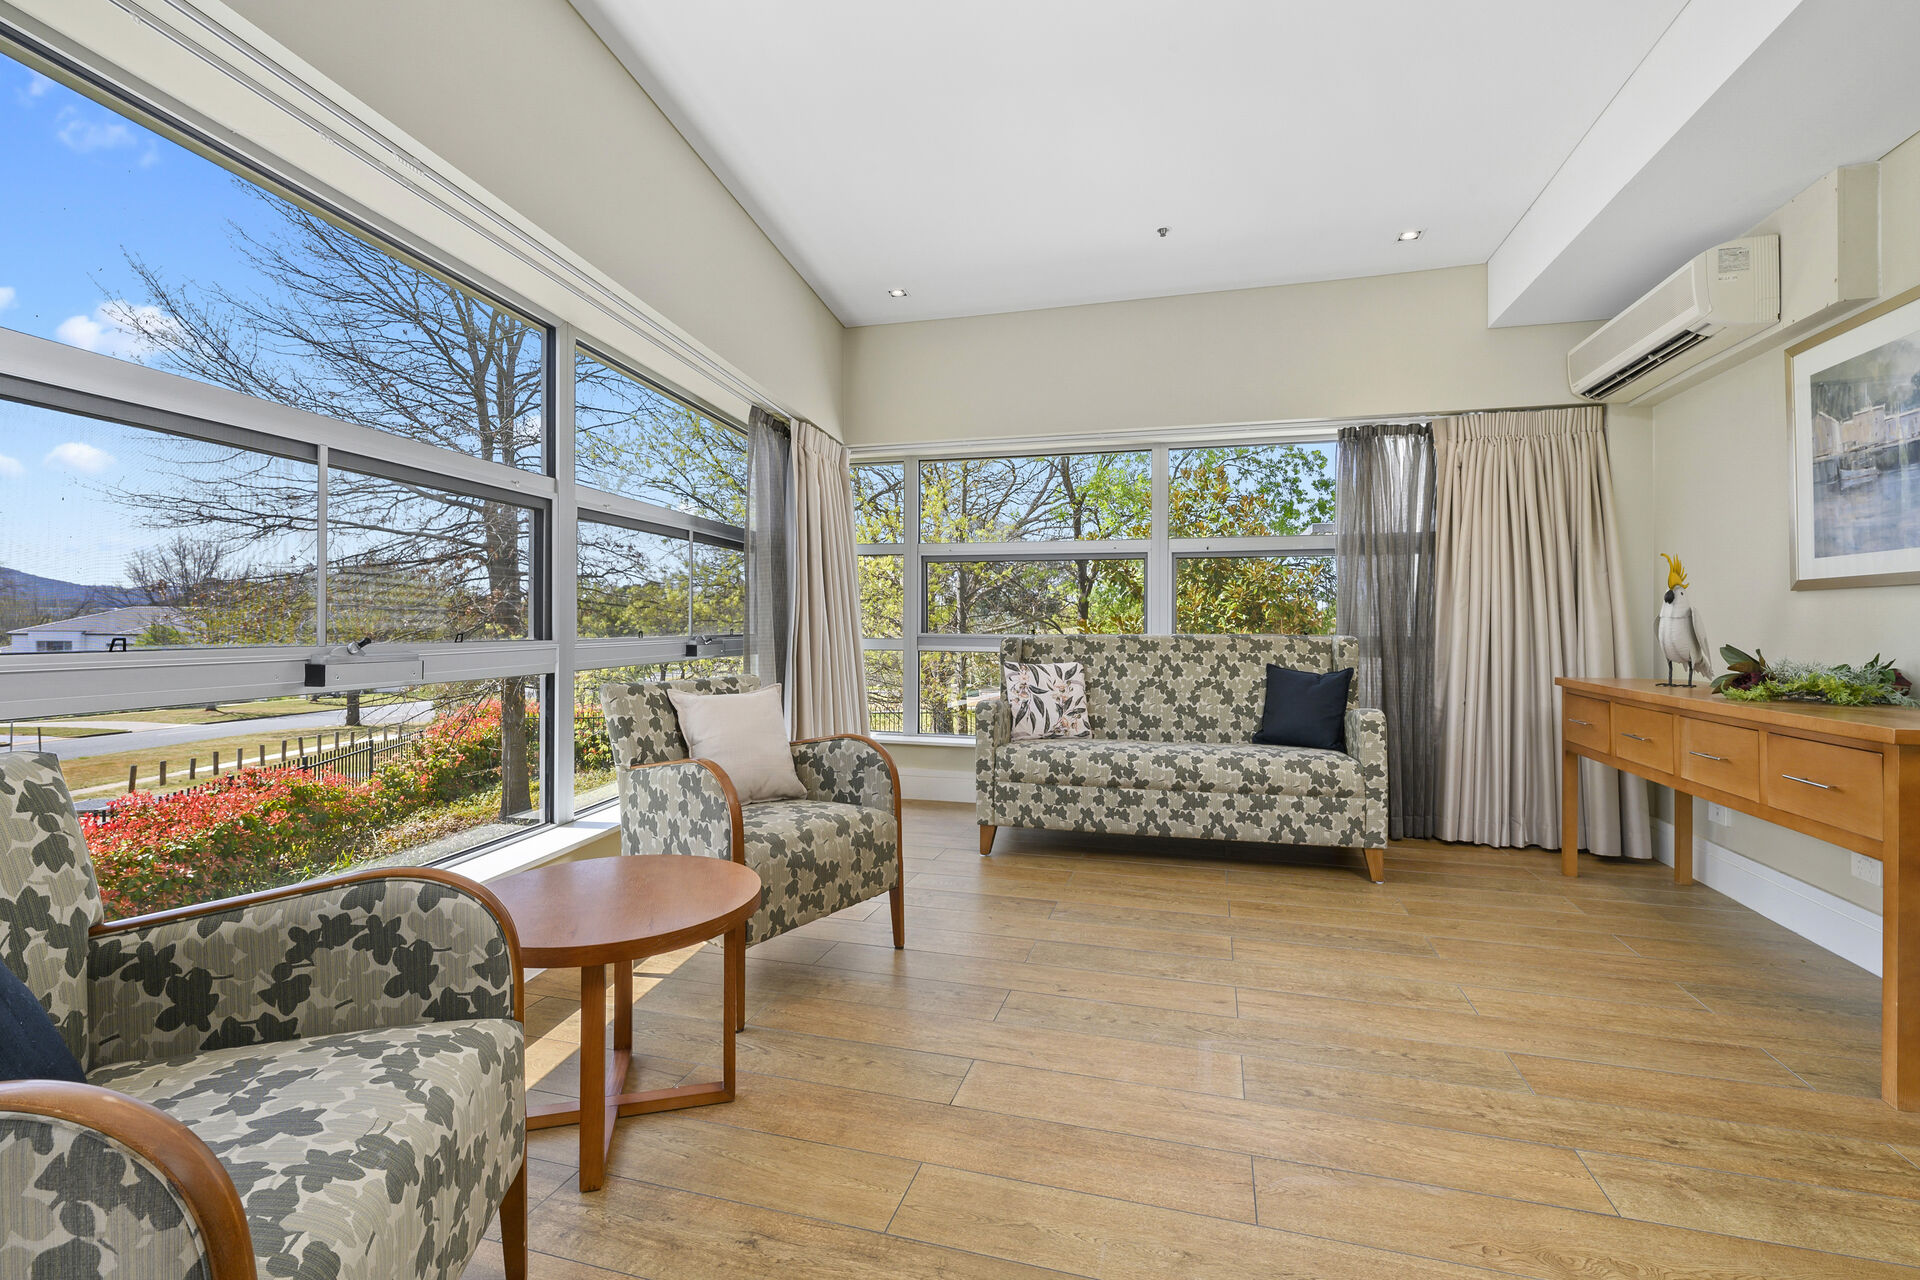 communal lounge area for nursing home residents to enjoy at baptistcare griffith residential aged care home